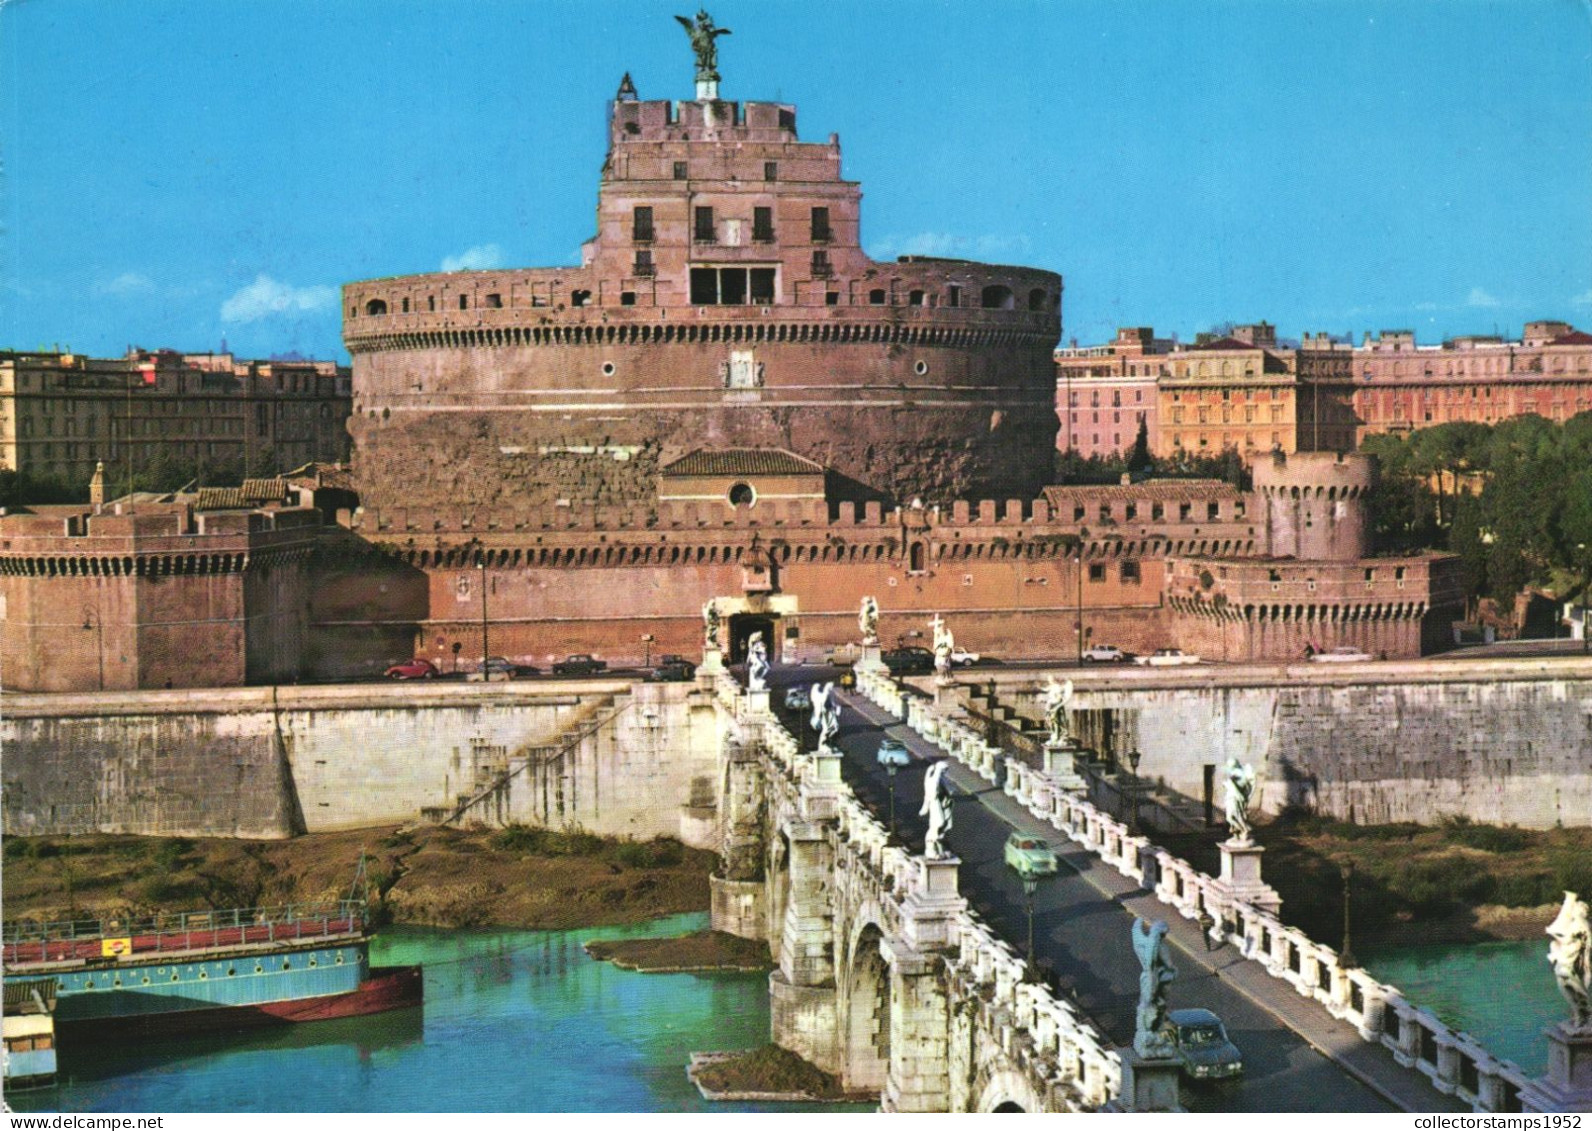 ROME, BRIDGE AND ST. ANGELO CASTLE, STATUES, ITALY - Bruggen